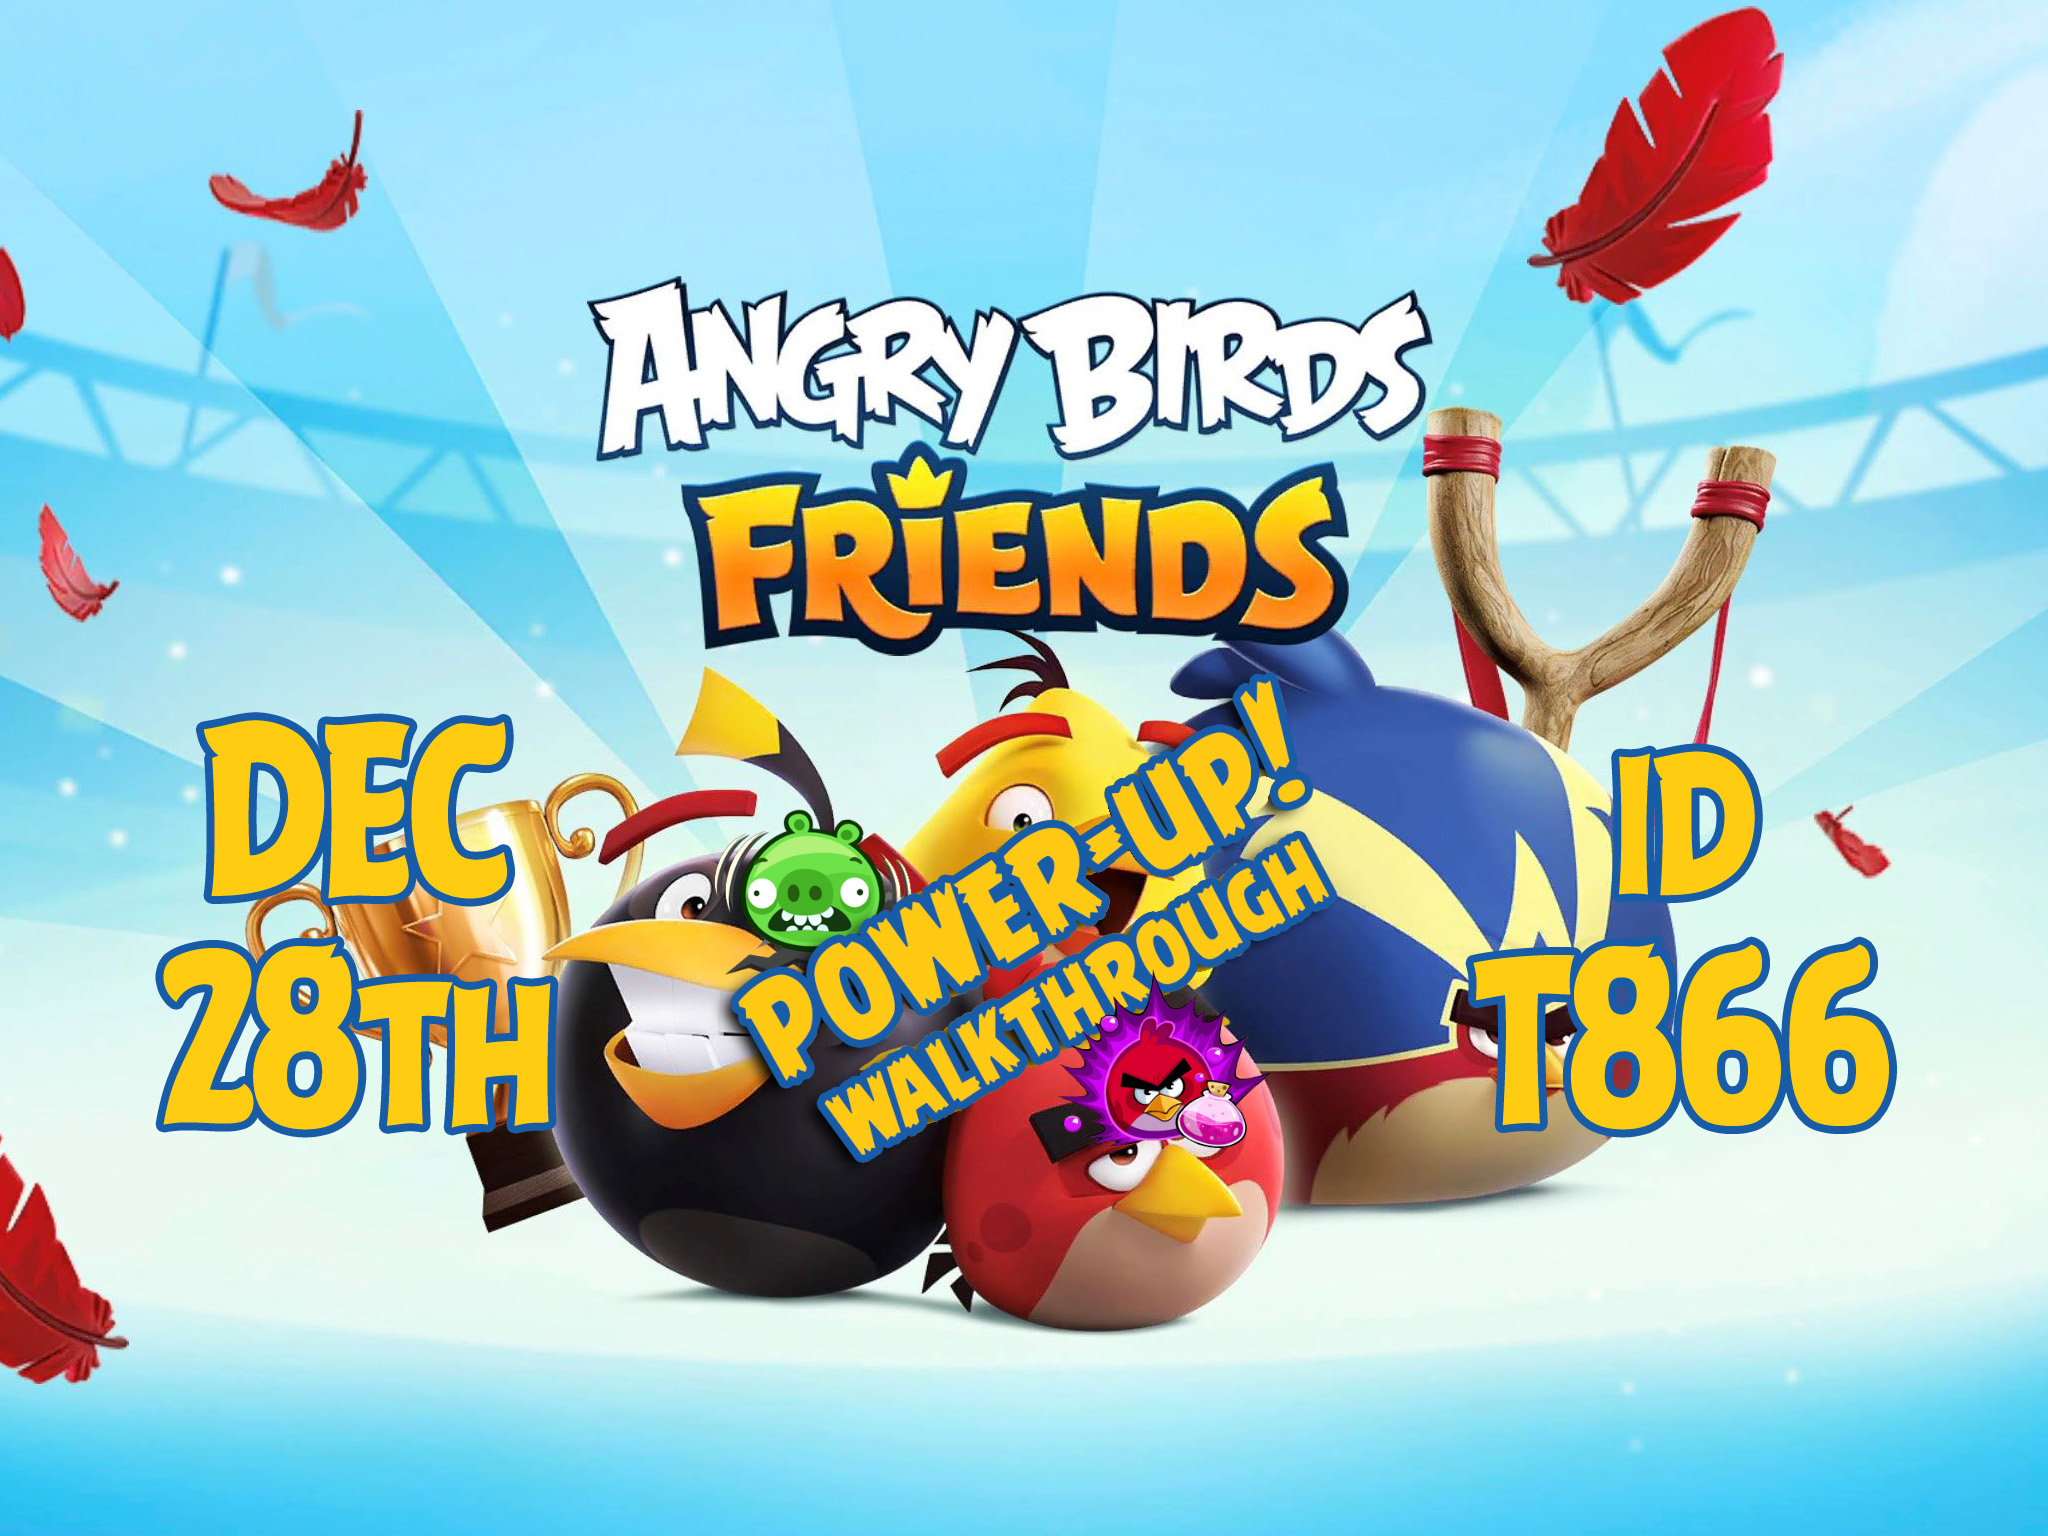 Angry-Birds-Friends-Tournament-T866-Feature-Image-PU